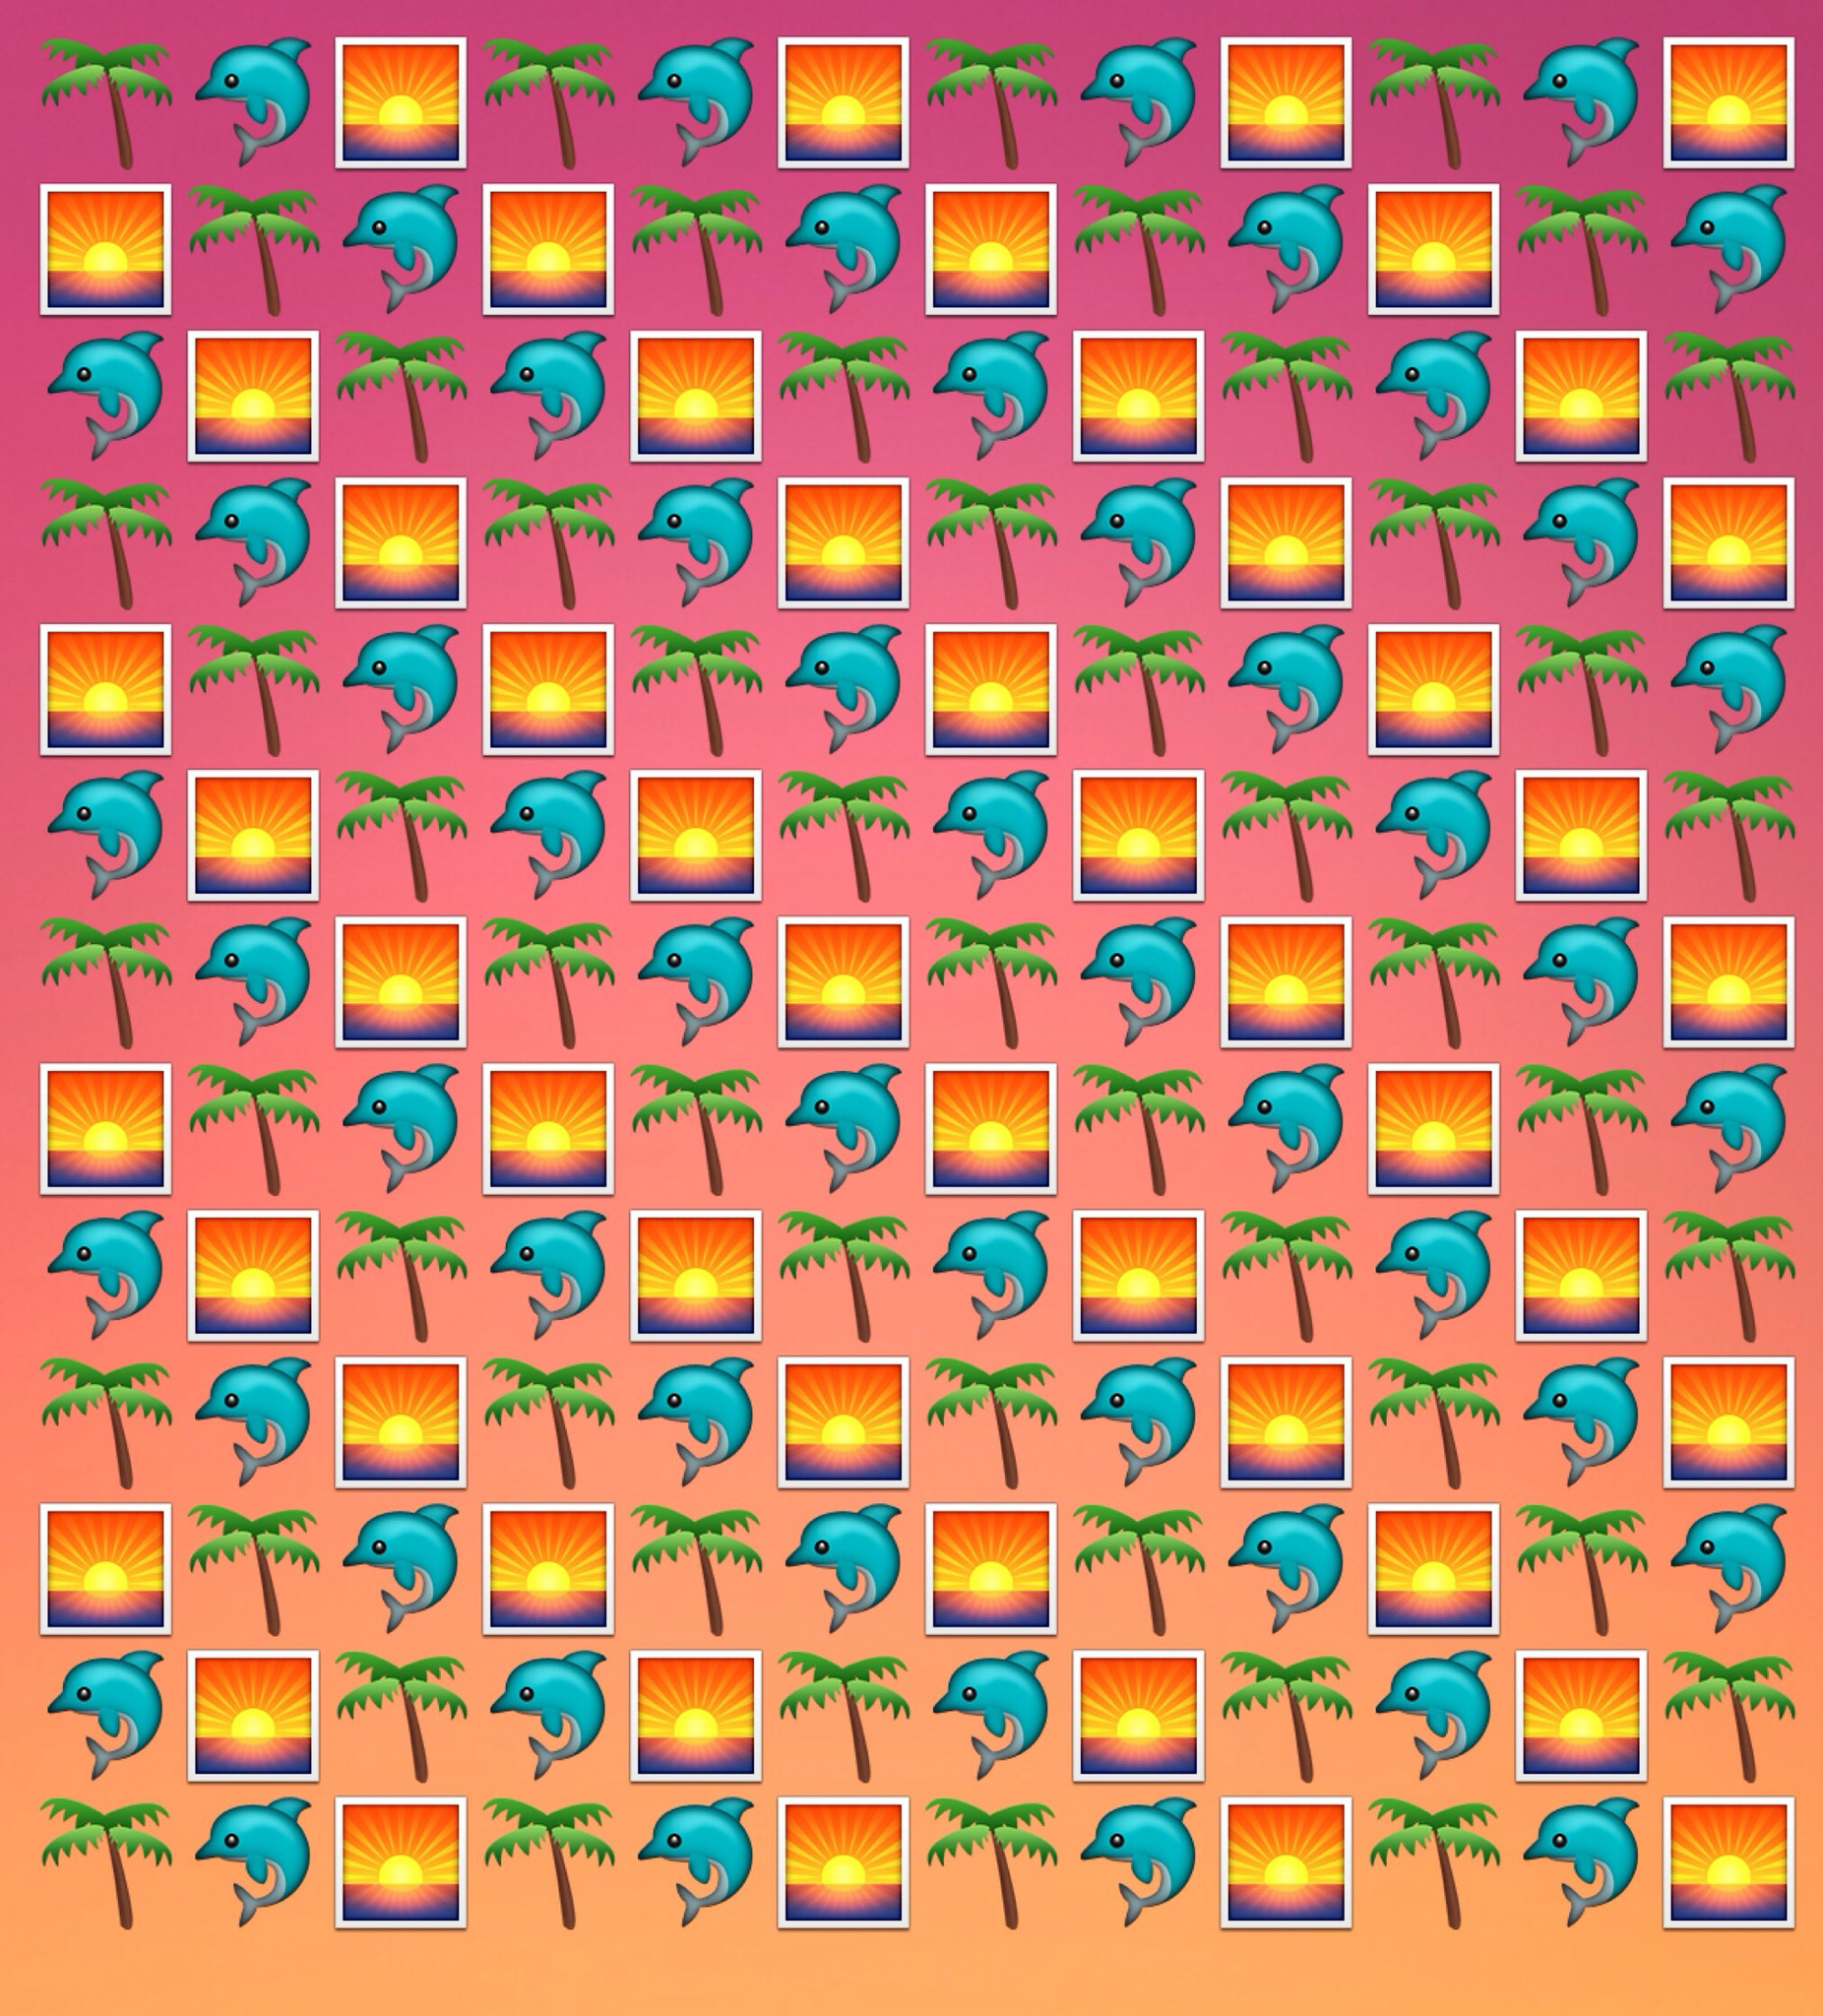 Emoji wallpaper background for desktop or phone dolphins on a tropical sunset beach